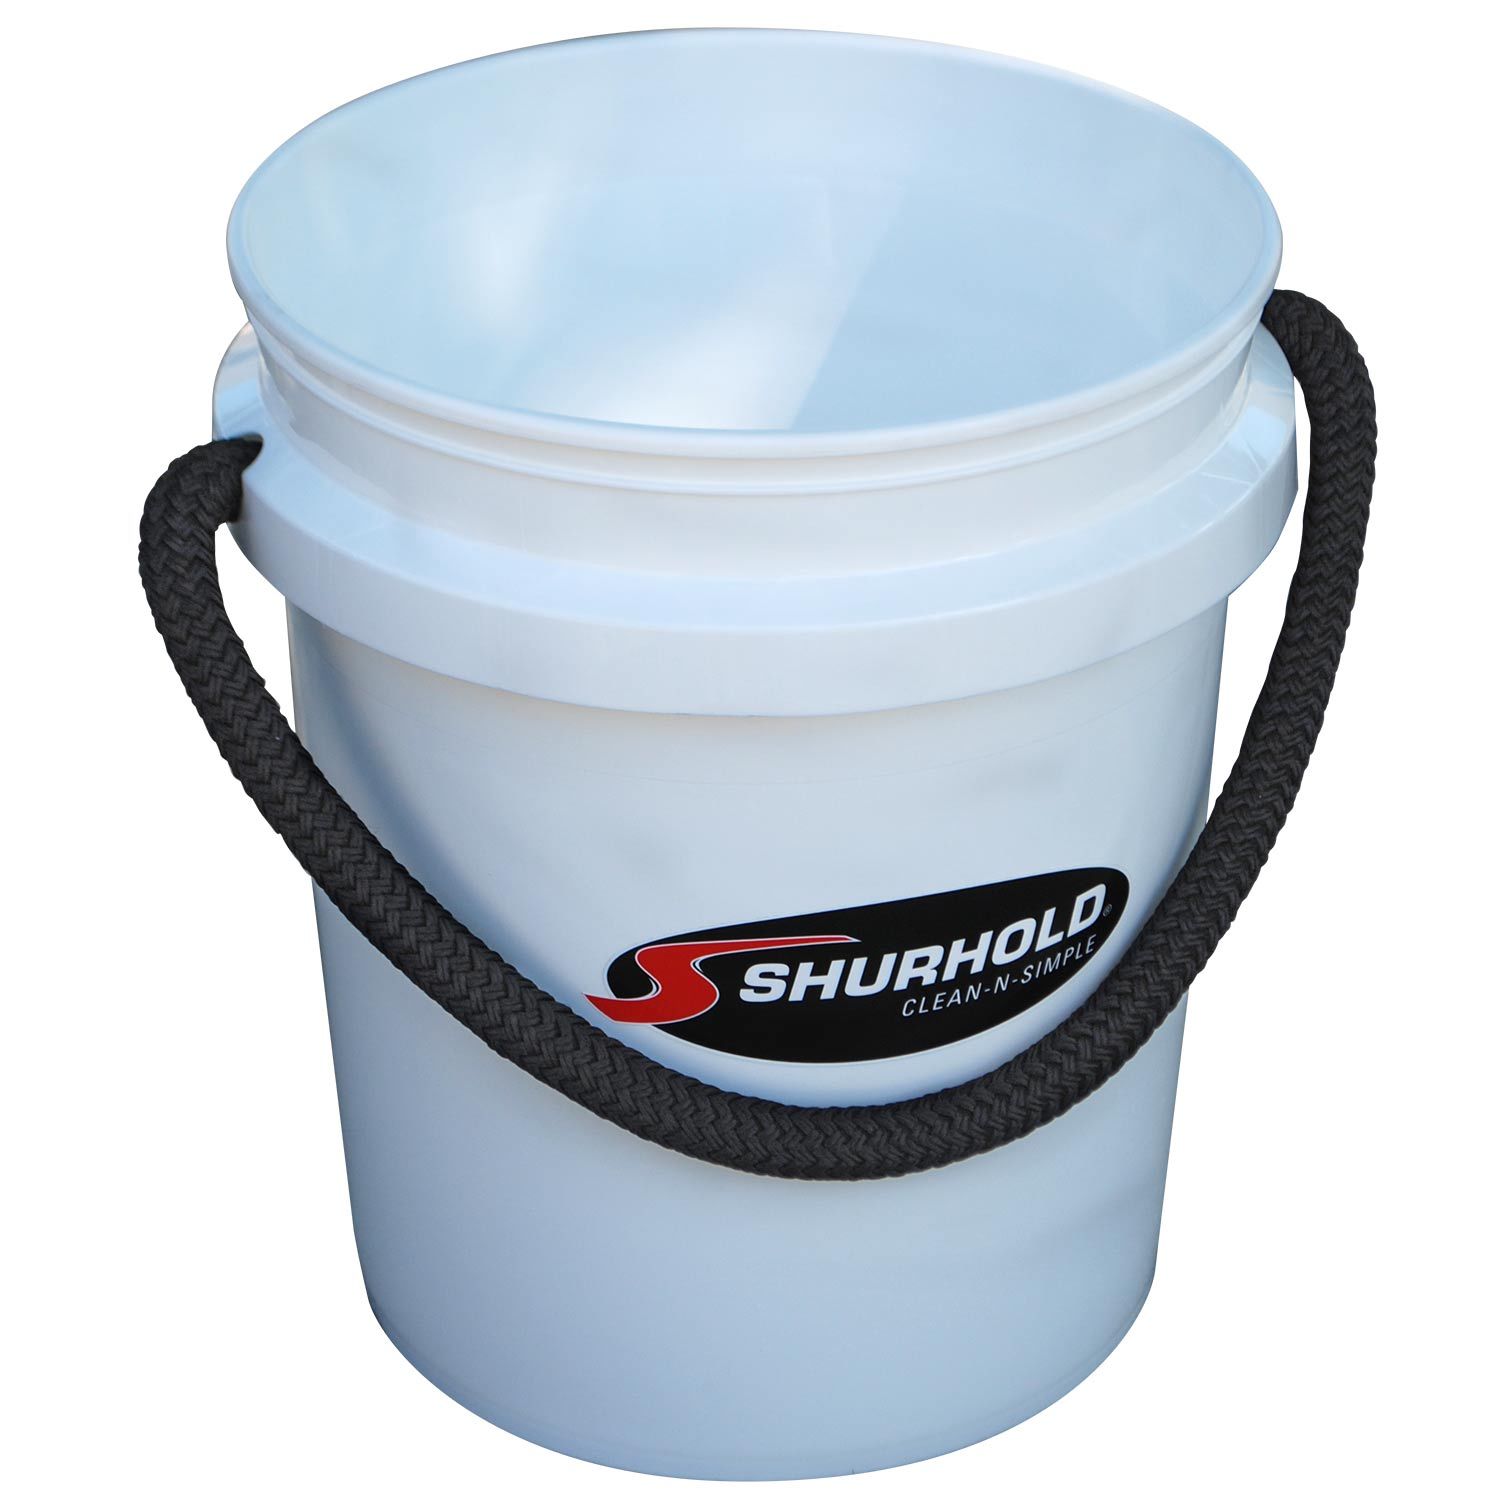 Built-in Bottom Handle 5 Gallon Bucket with Rope Handle